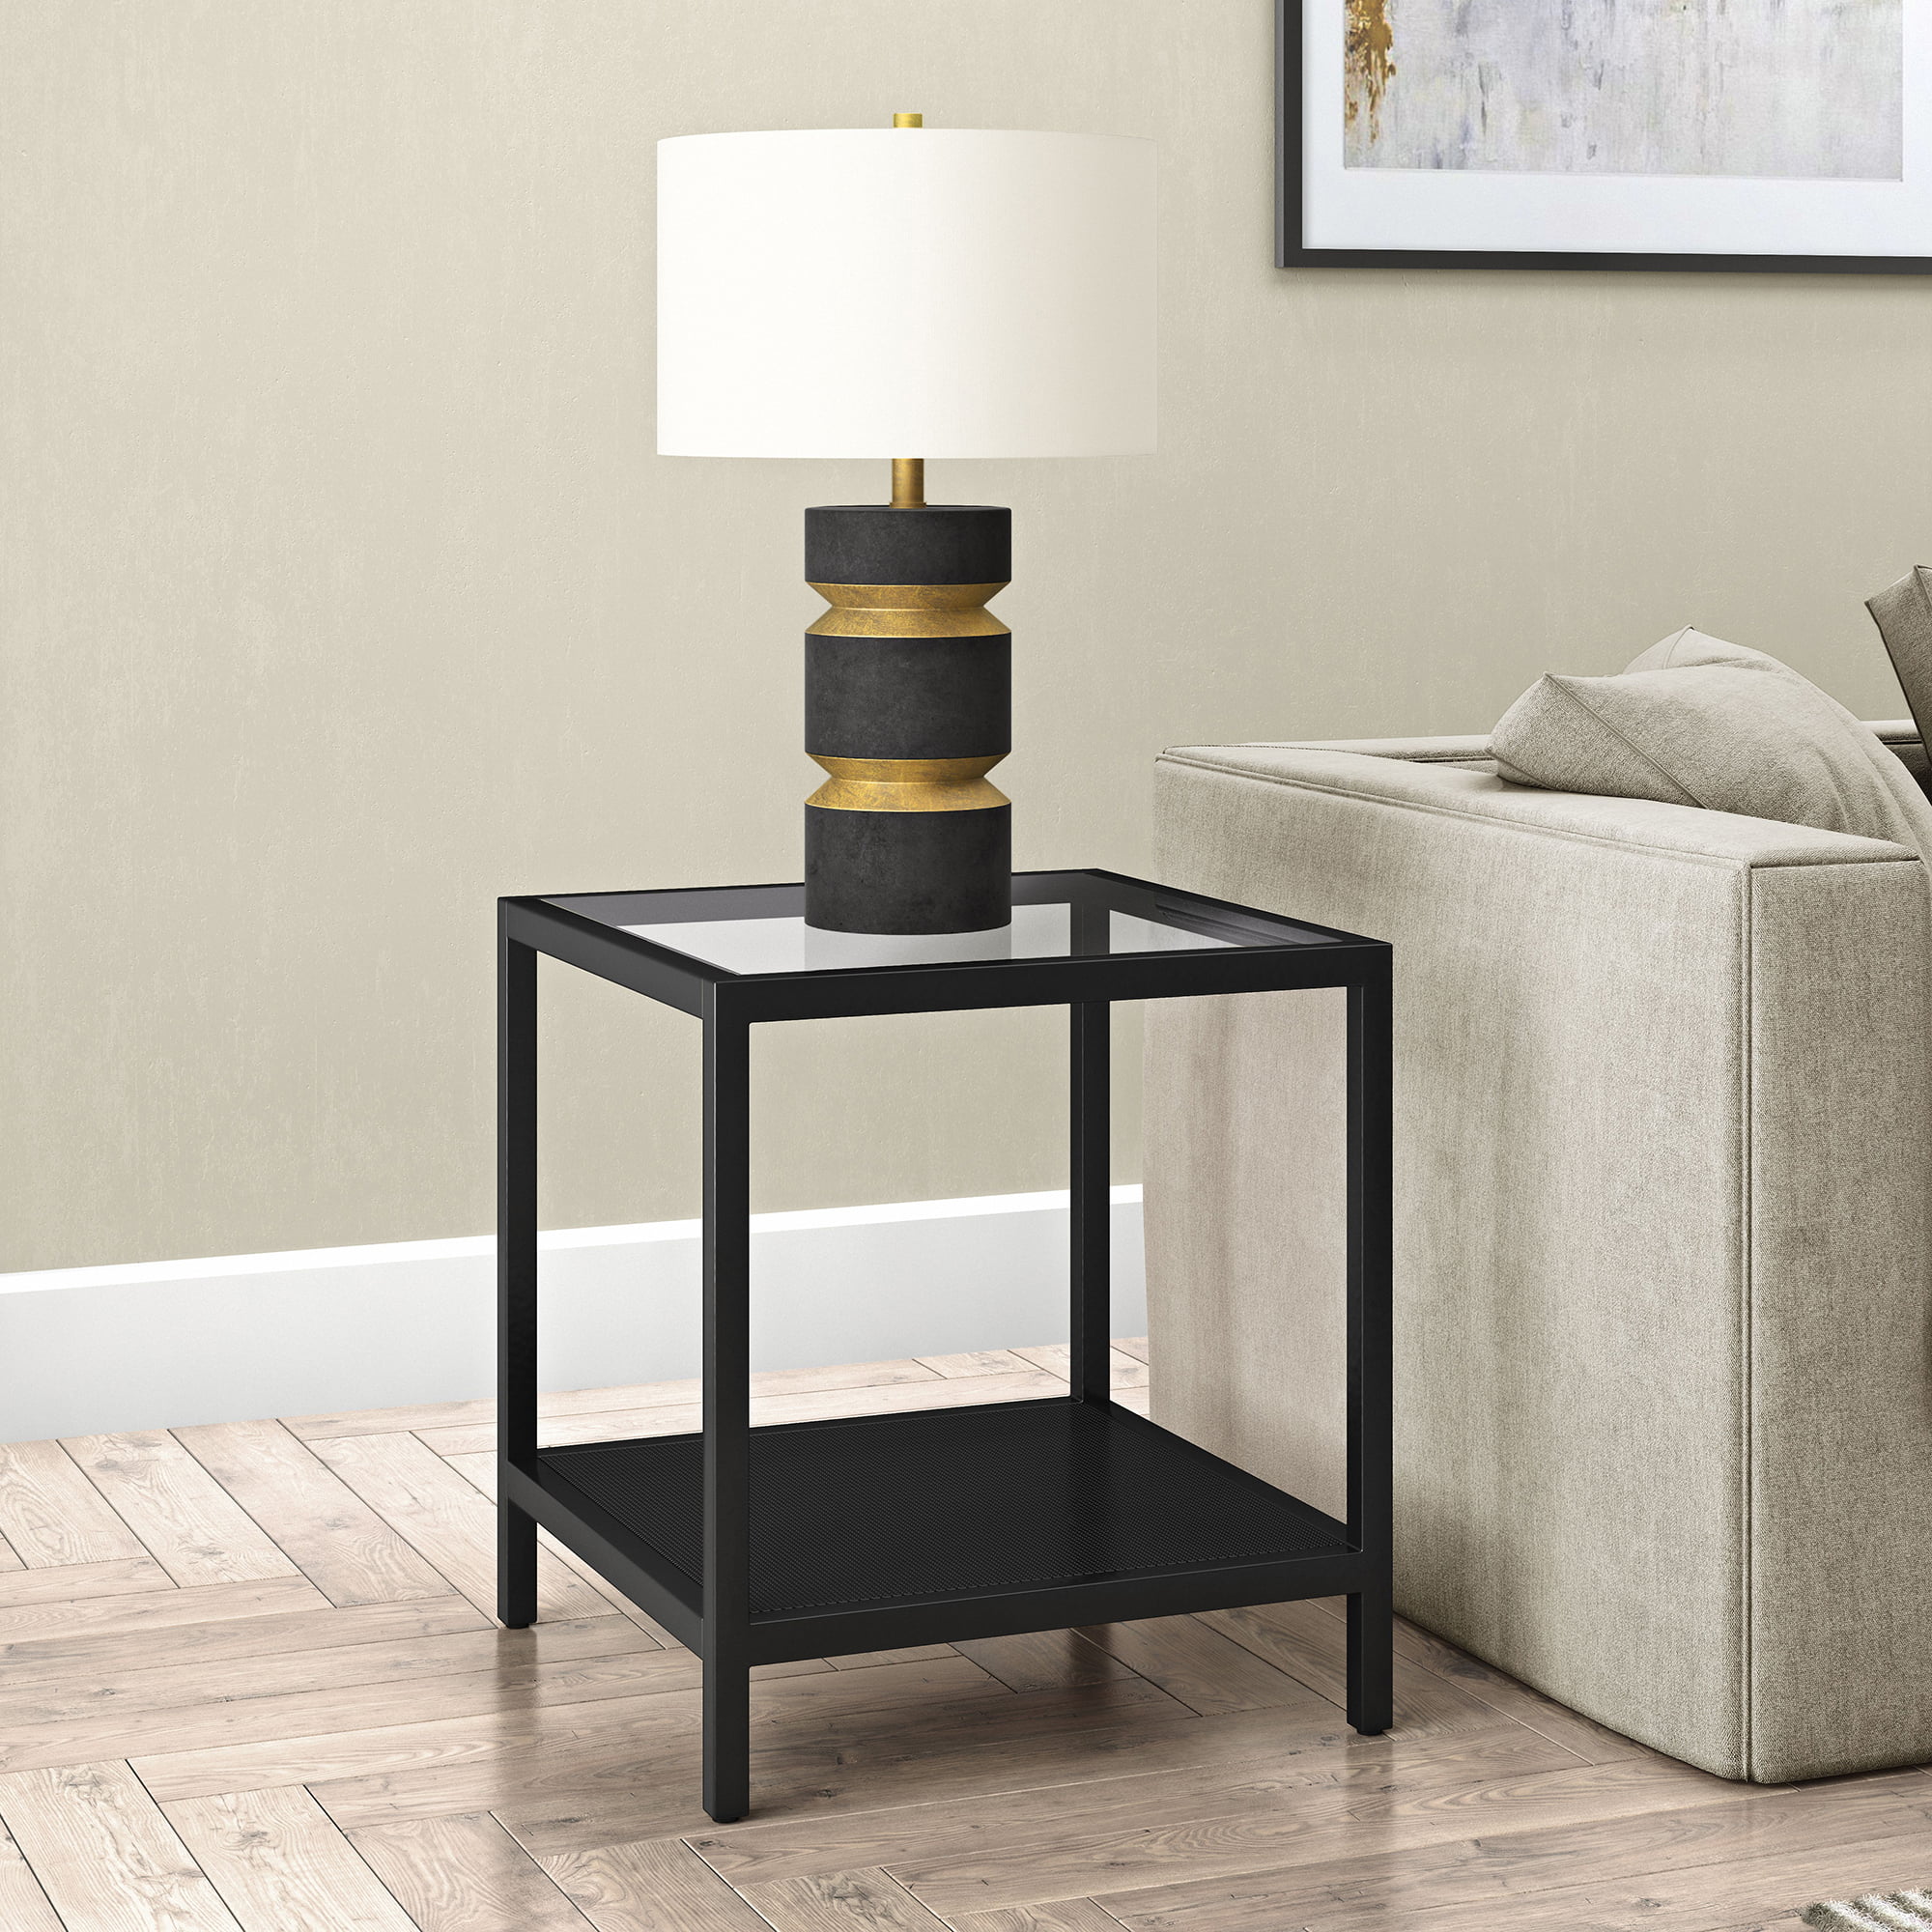 Industrial Glass Side Table with Perforated Metal Storage Shelf for